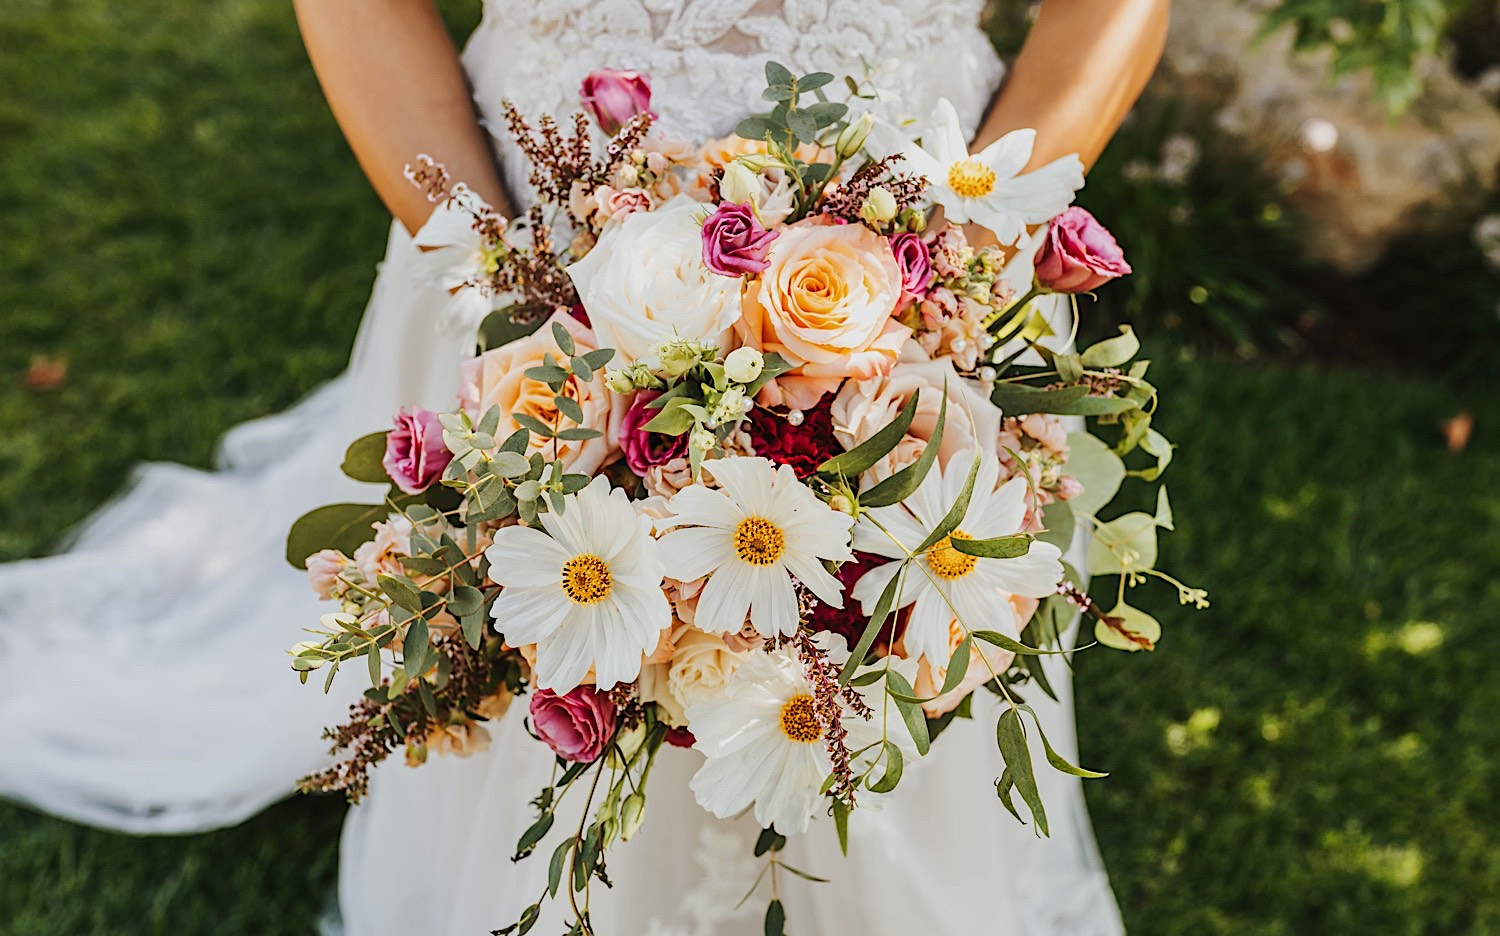 Close up photo of a flower bouquet being held by a bride